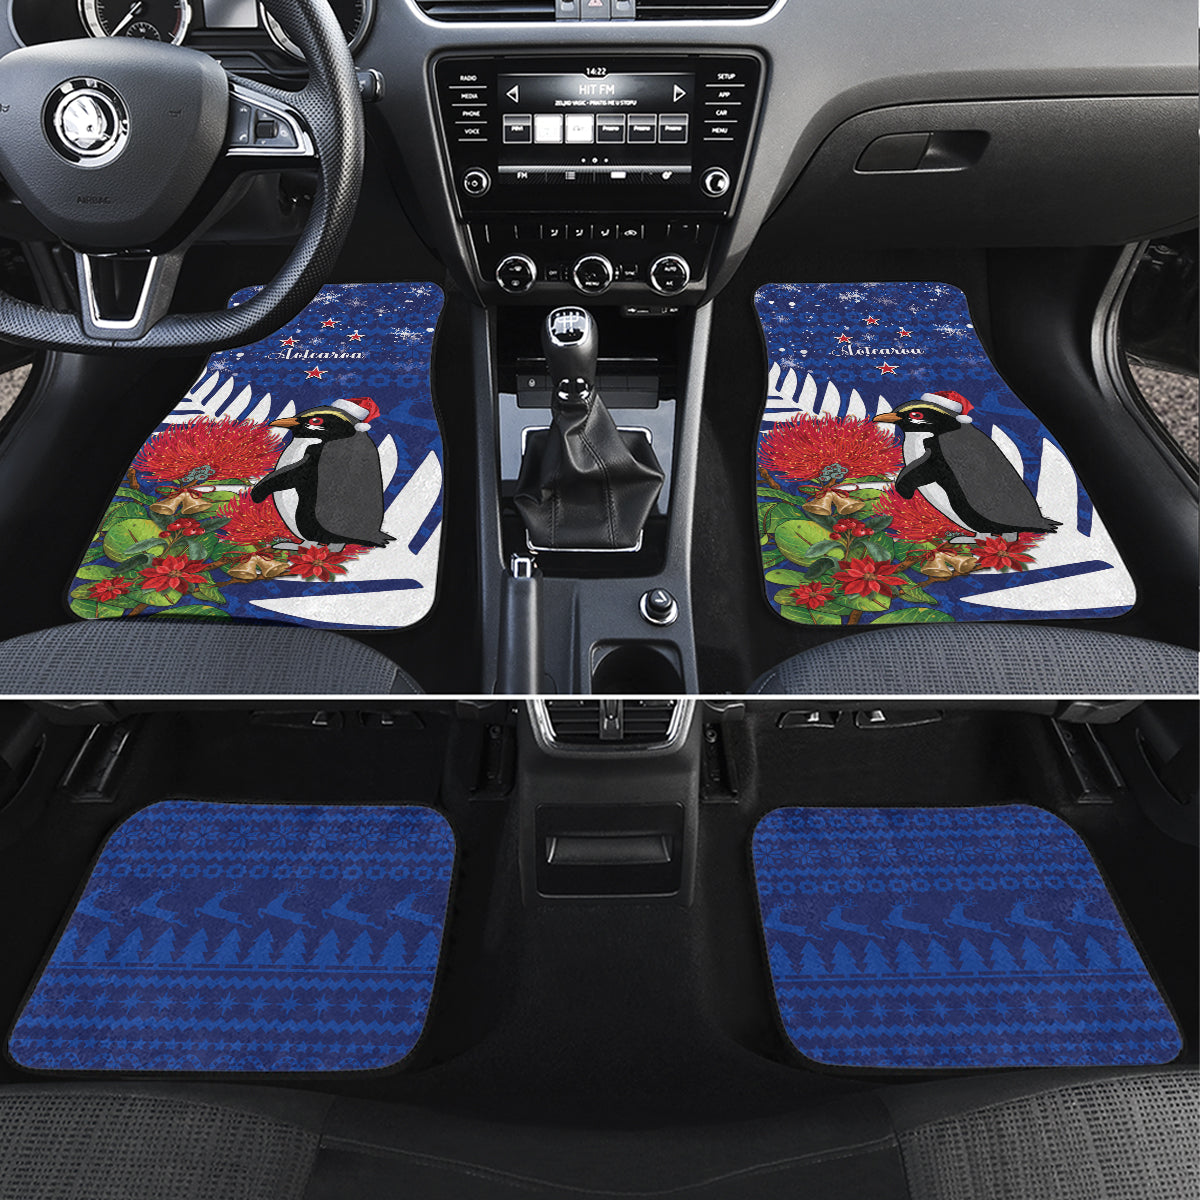 New Zealand Christmas In July Car Mats Fiordland Penguin With Pohutukawa Flower